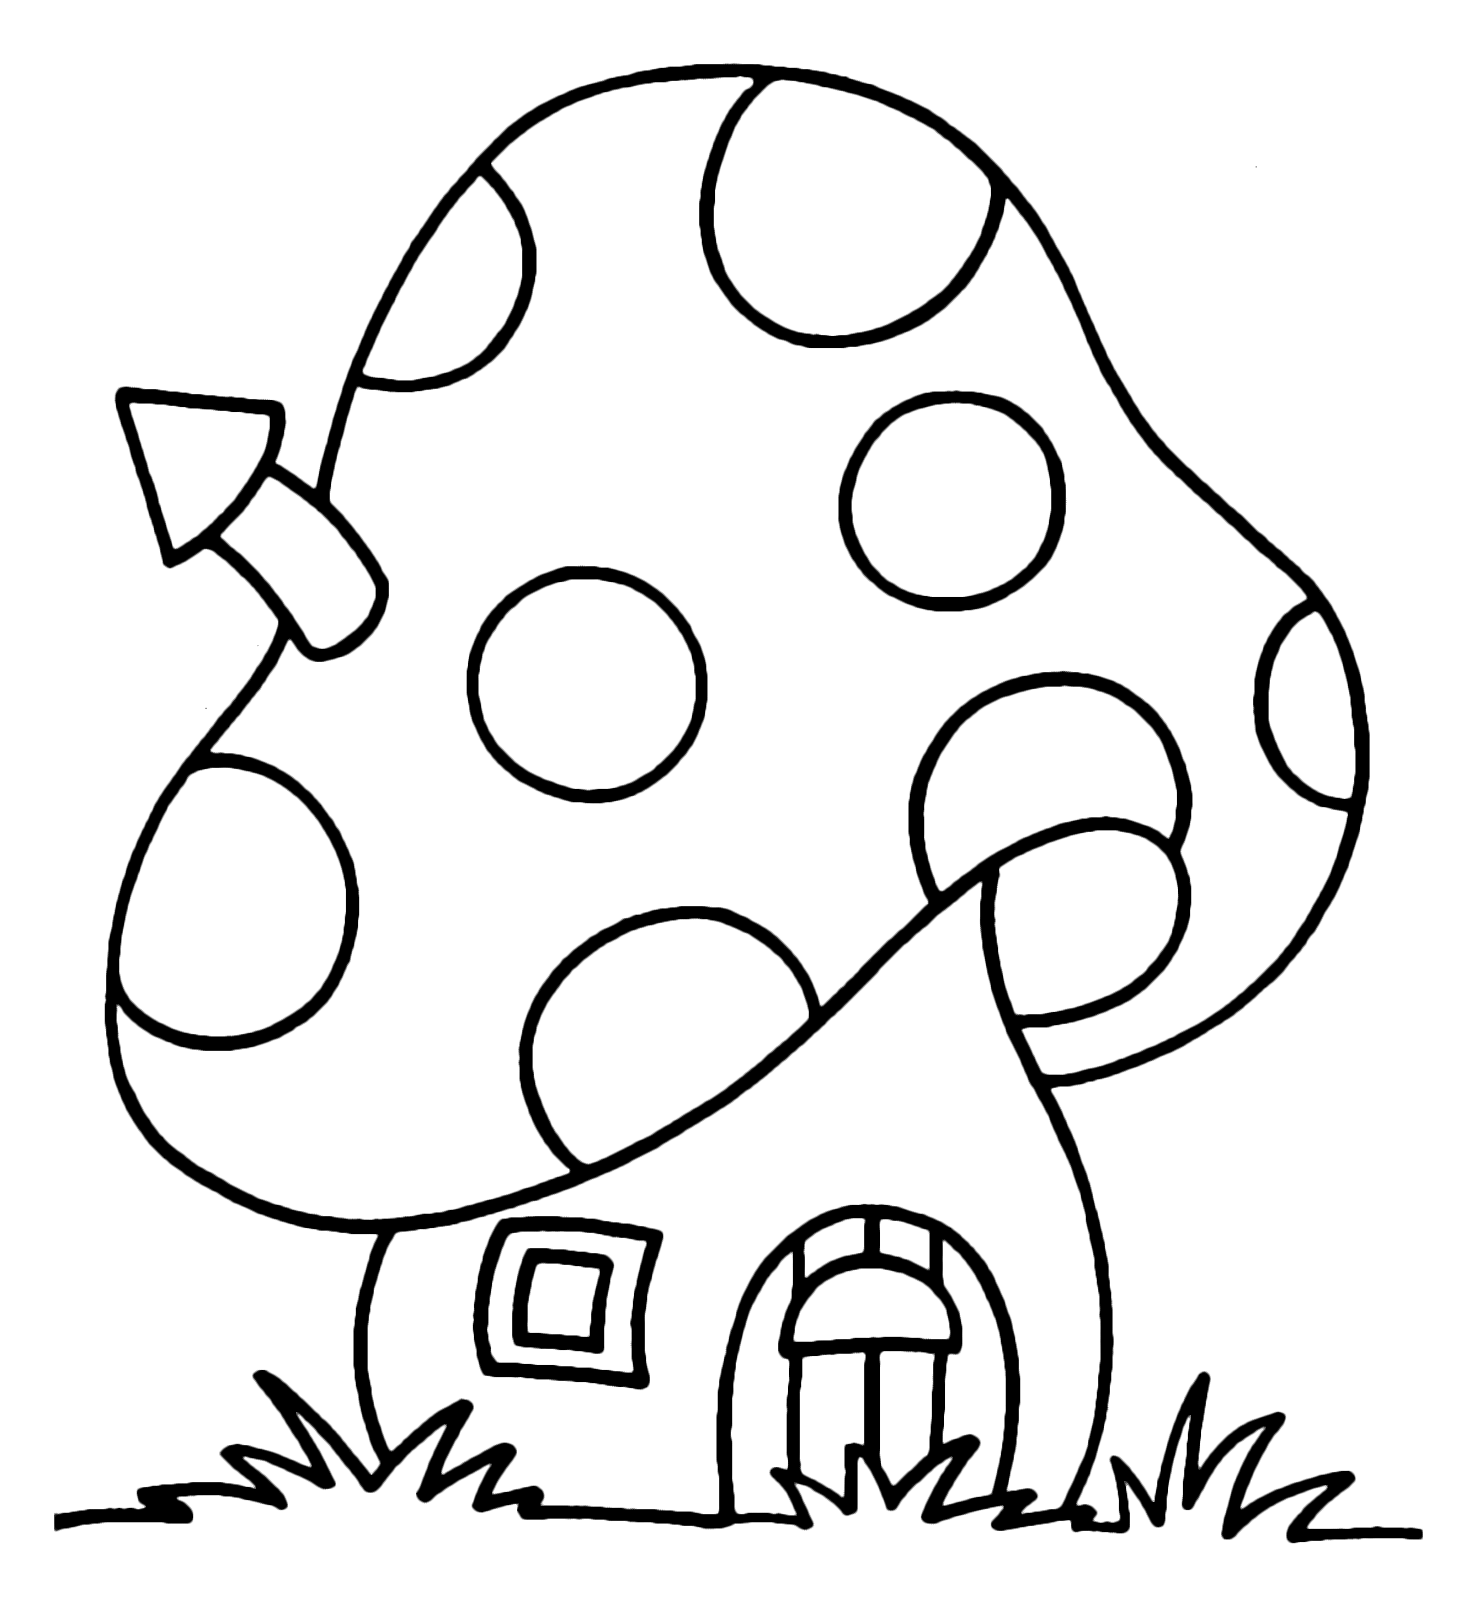 Easy Coloring Pages Puppy ⋆ coloring.rocks!